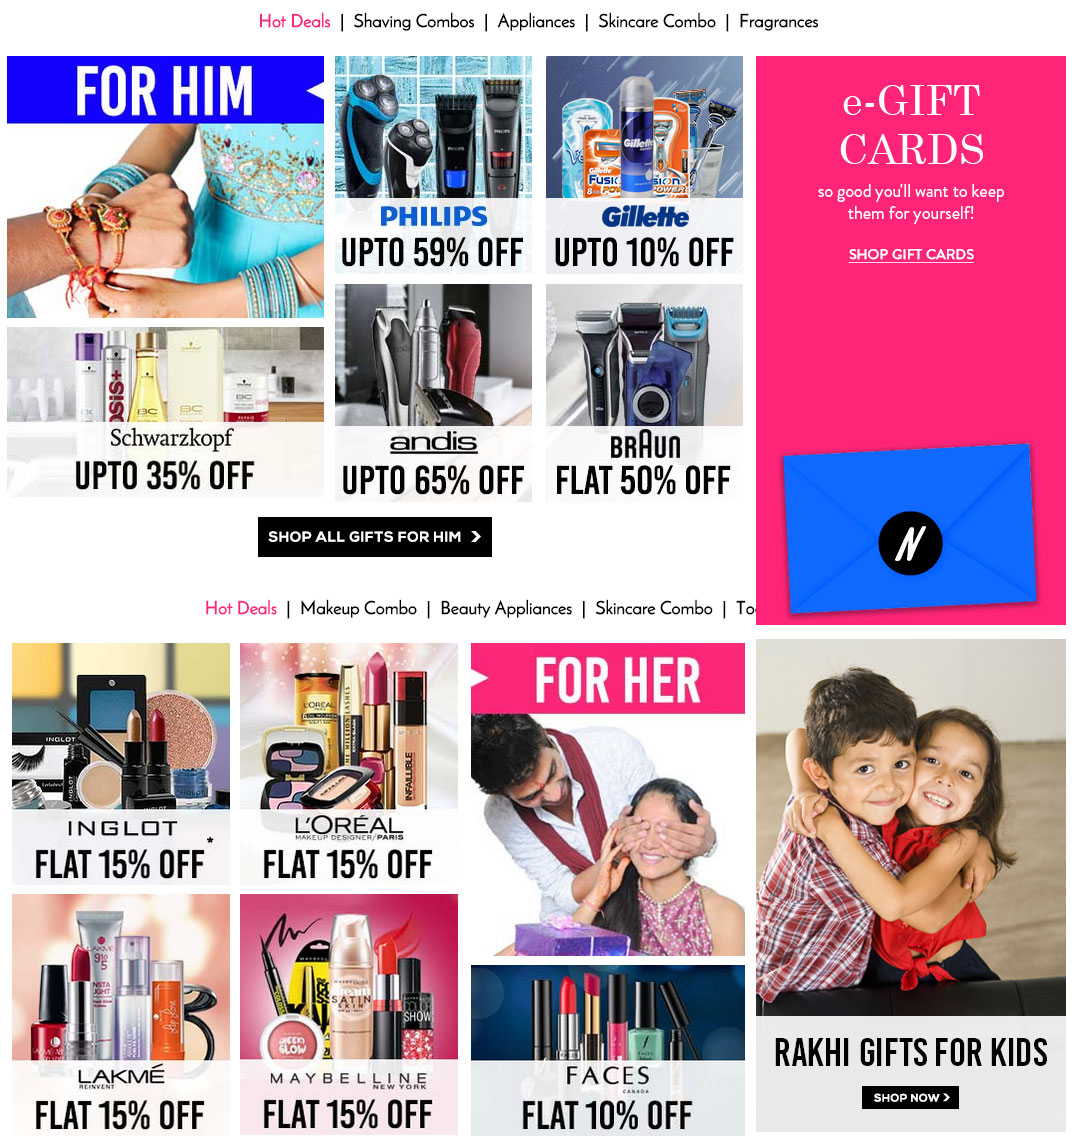 nykaa-rakhi-sale-gifts-hampers-india-fast-delivery-8-24-2015-offers